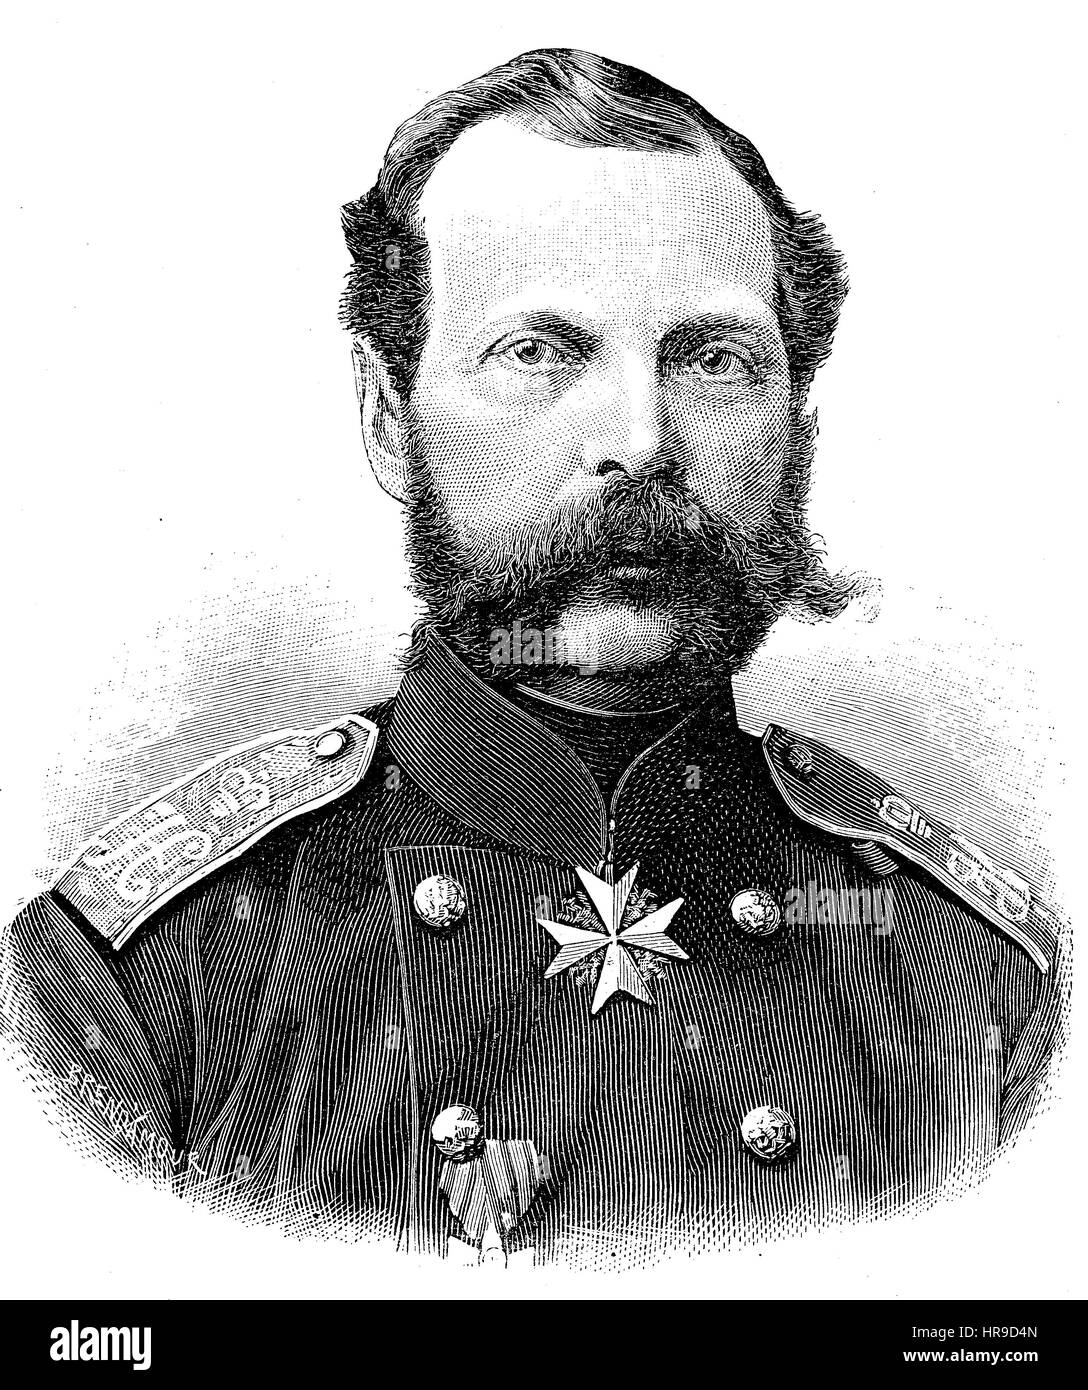 Alexander II., 1818 - 1881, was the Emperor of Russia from 2 March 1855 until his assassination in 1881. He was also the King of Poland and the Grand Duke of Finland, Situation from the time of The Franco-Prussian War or Franco-German War,  Deutsch-Franzoesischer Krieg, 1870-1871, Reproduction of an original woodcut from the year 1885, digital improved Stock Photo